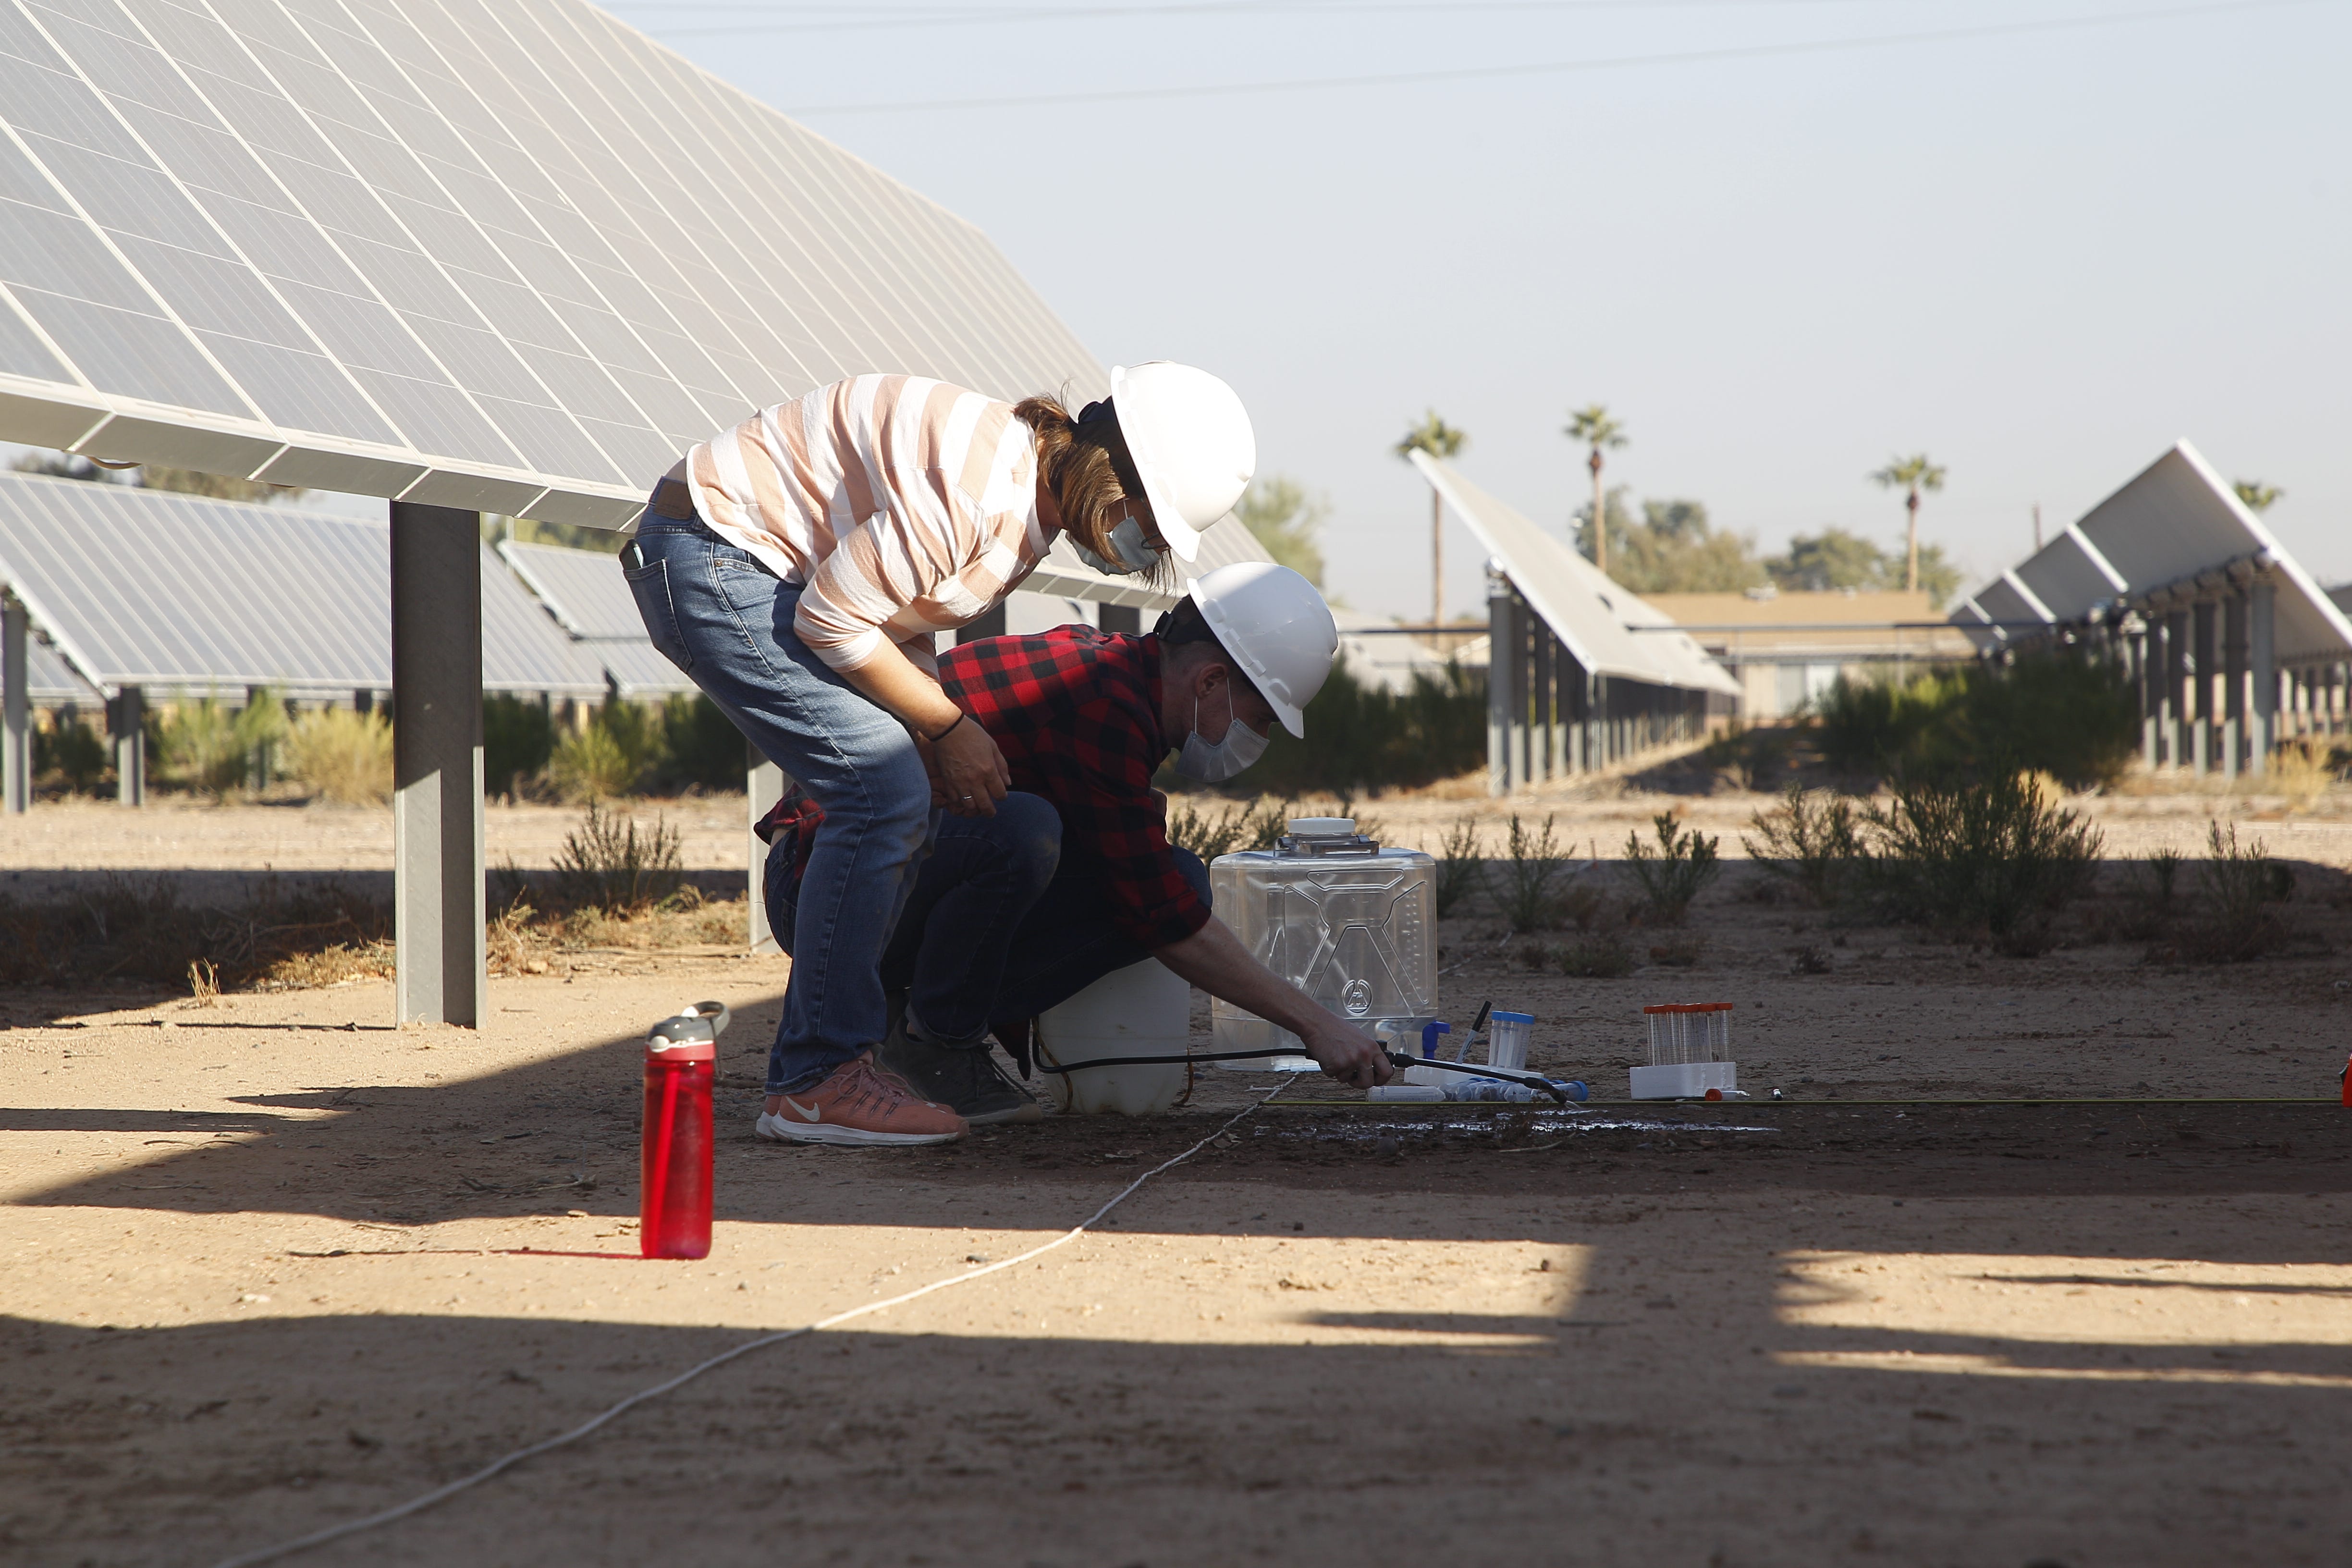 ASU research assistants Corey Nelson and Julie Rakes spray soil with water to see where biocrust grows.